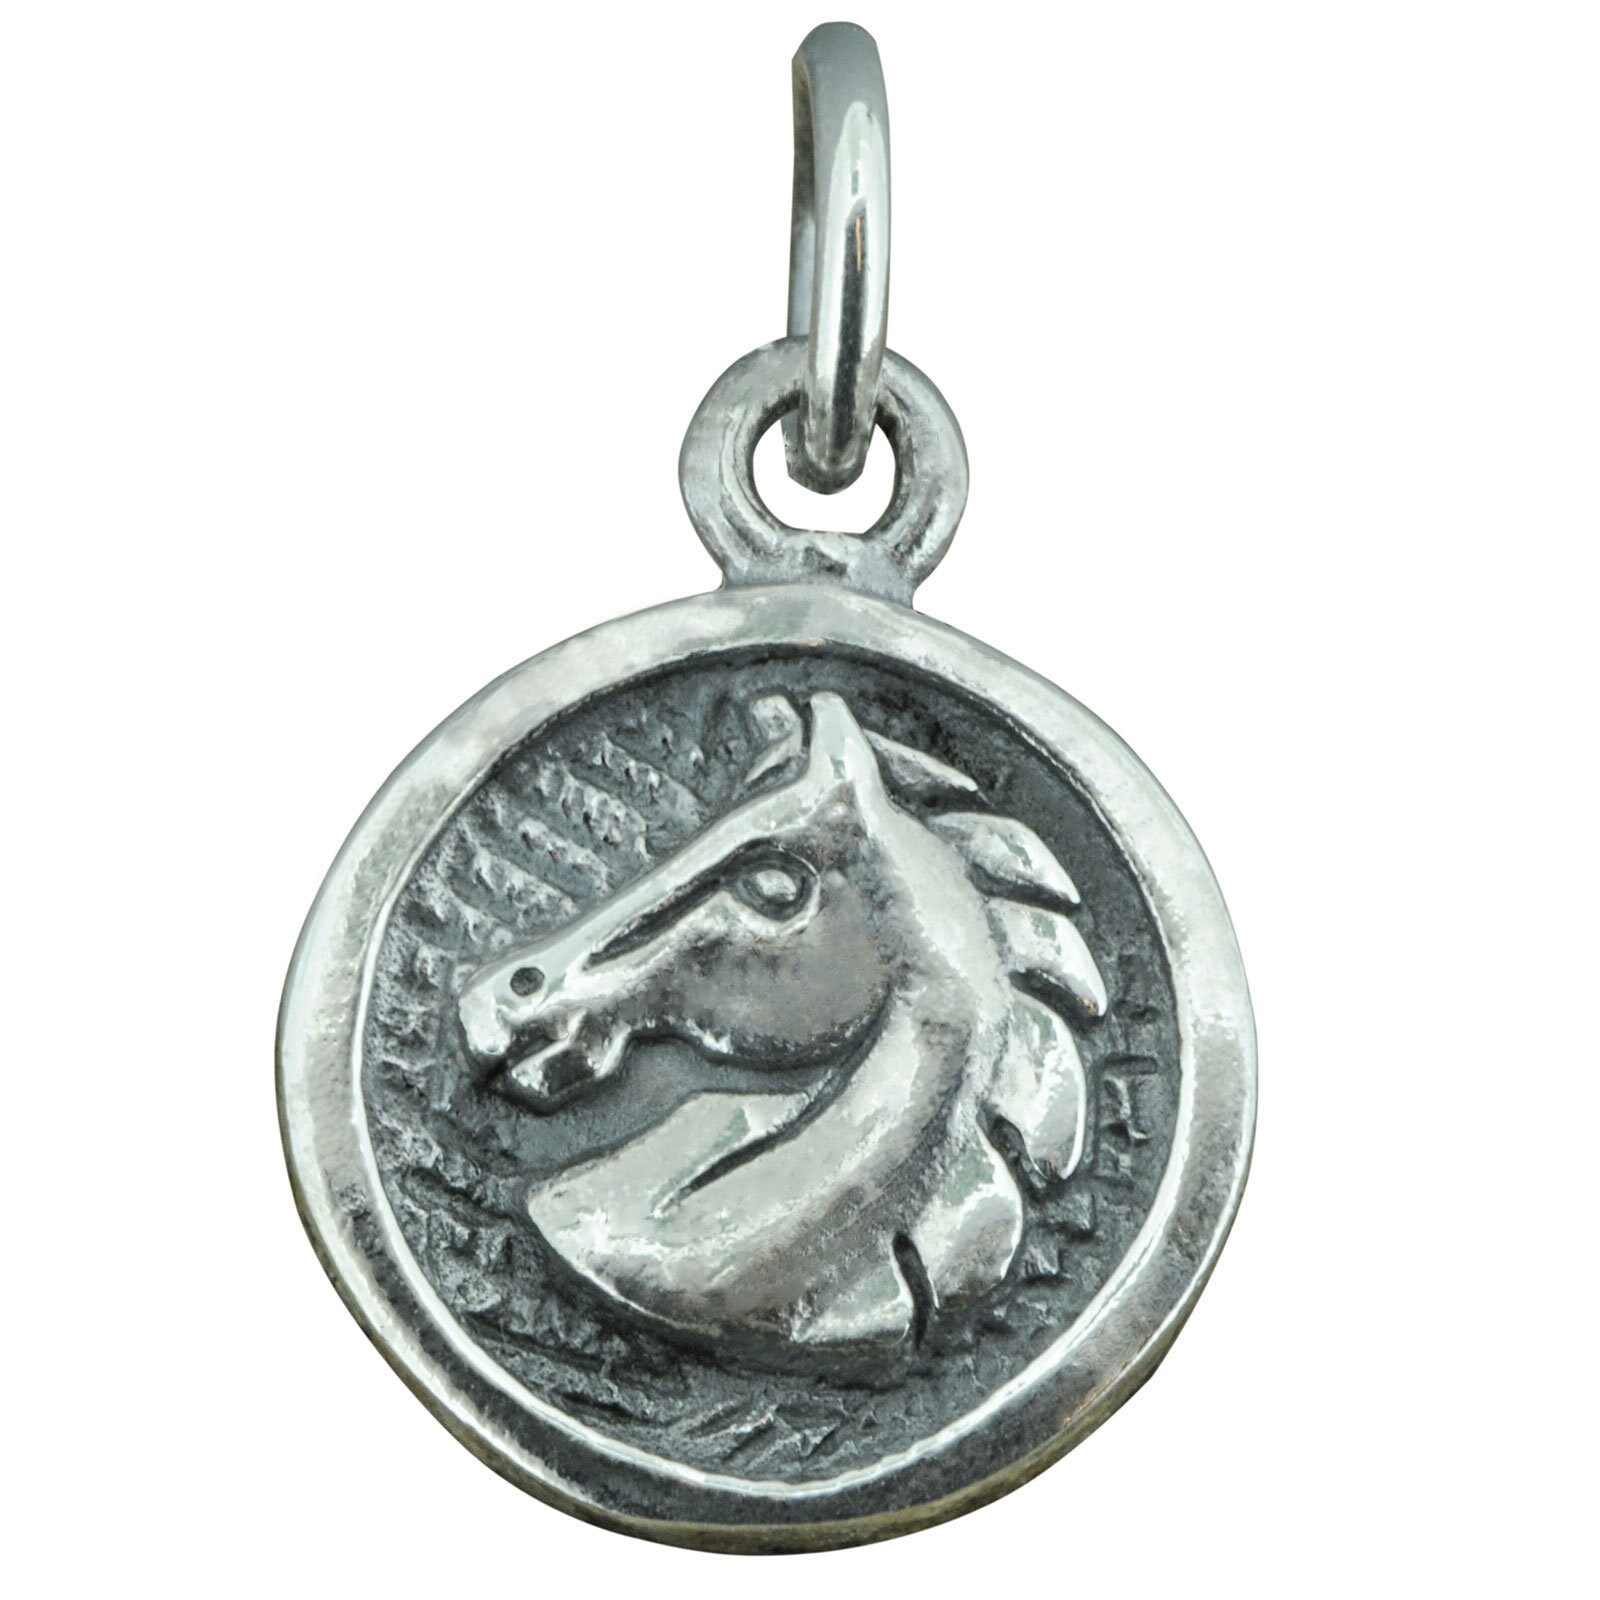 HORSE HEAD HEART 2.8 g 925 Solid Sterling Silver Charm Pendant Stamped BELDIAMO 